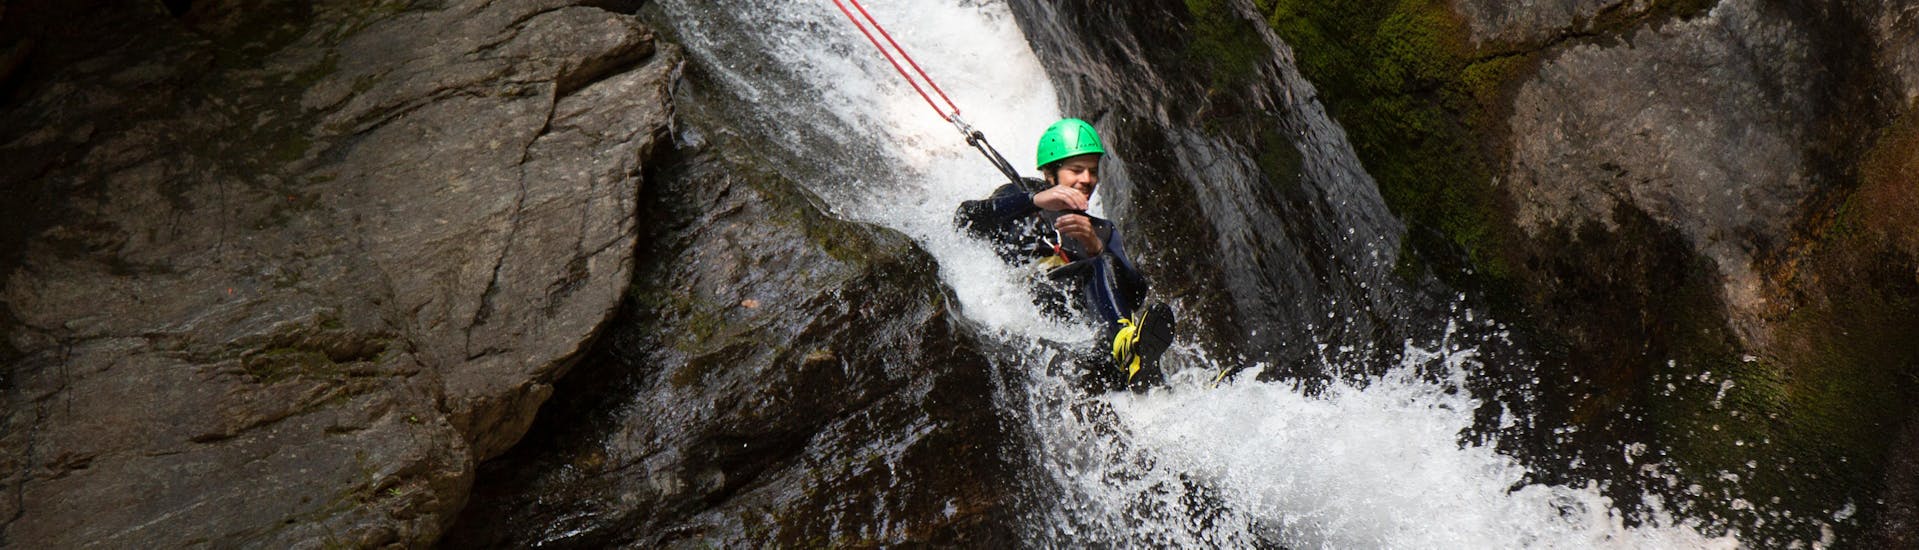 Canyoning facile à Ried im Oberinntal.